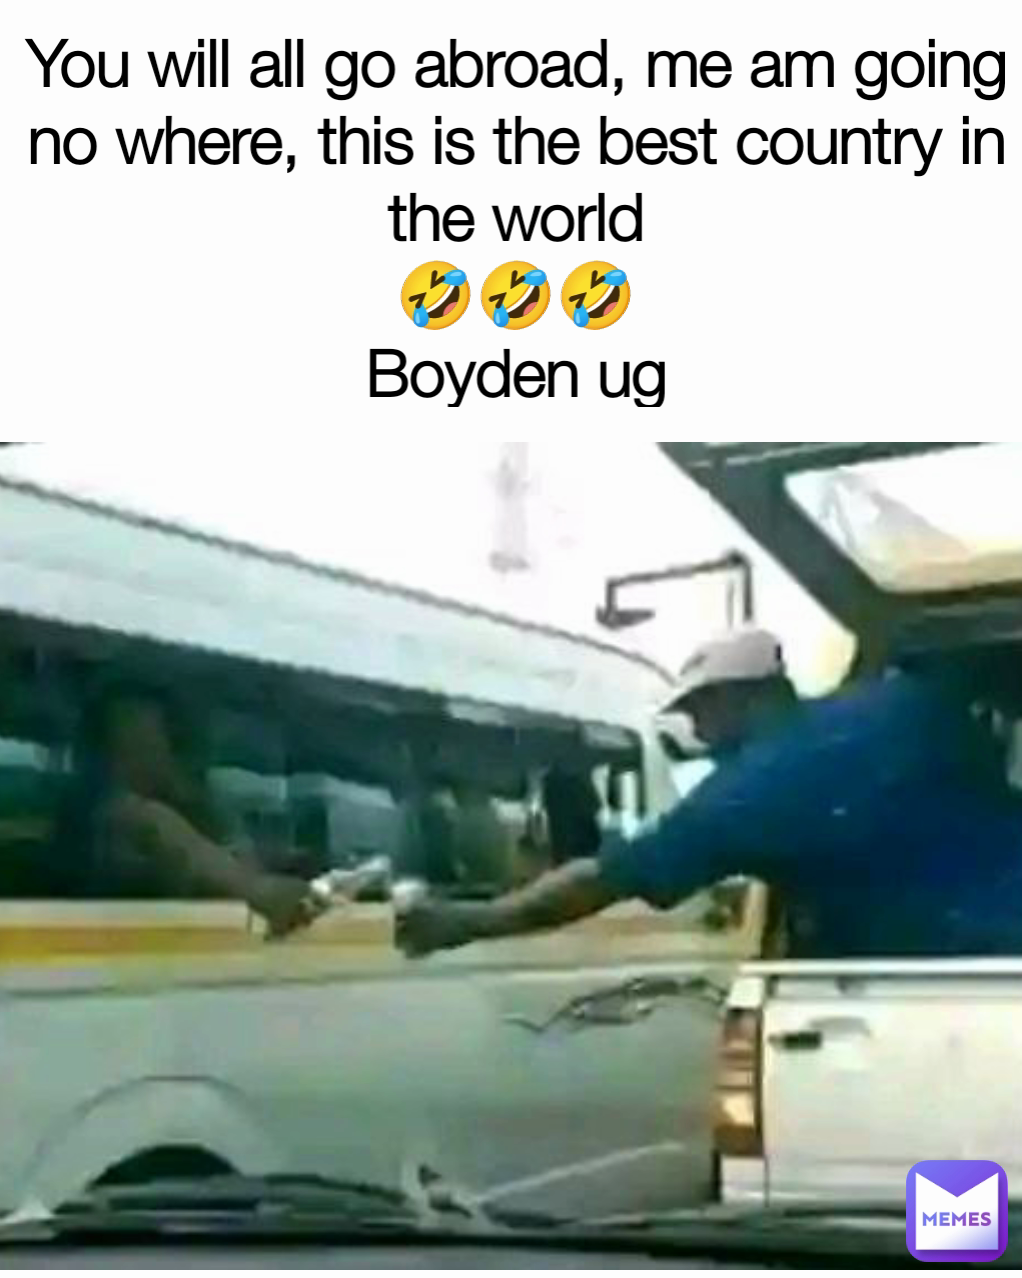 You will all go abroad, me am going no where, this is the best country in the world
🤣🤣🤣
Boyden ug